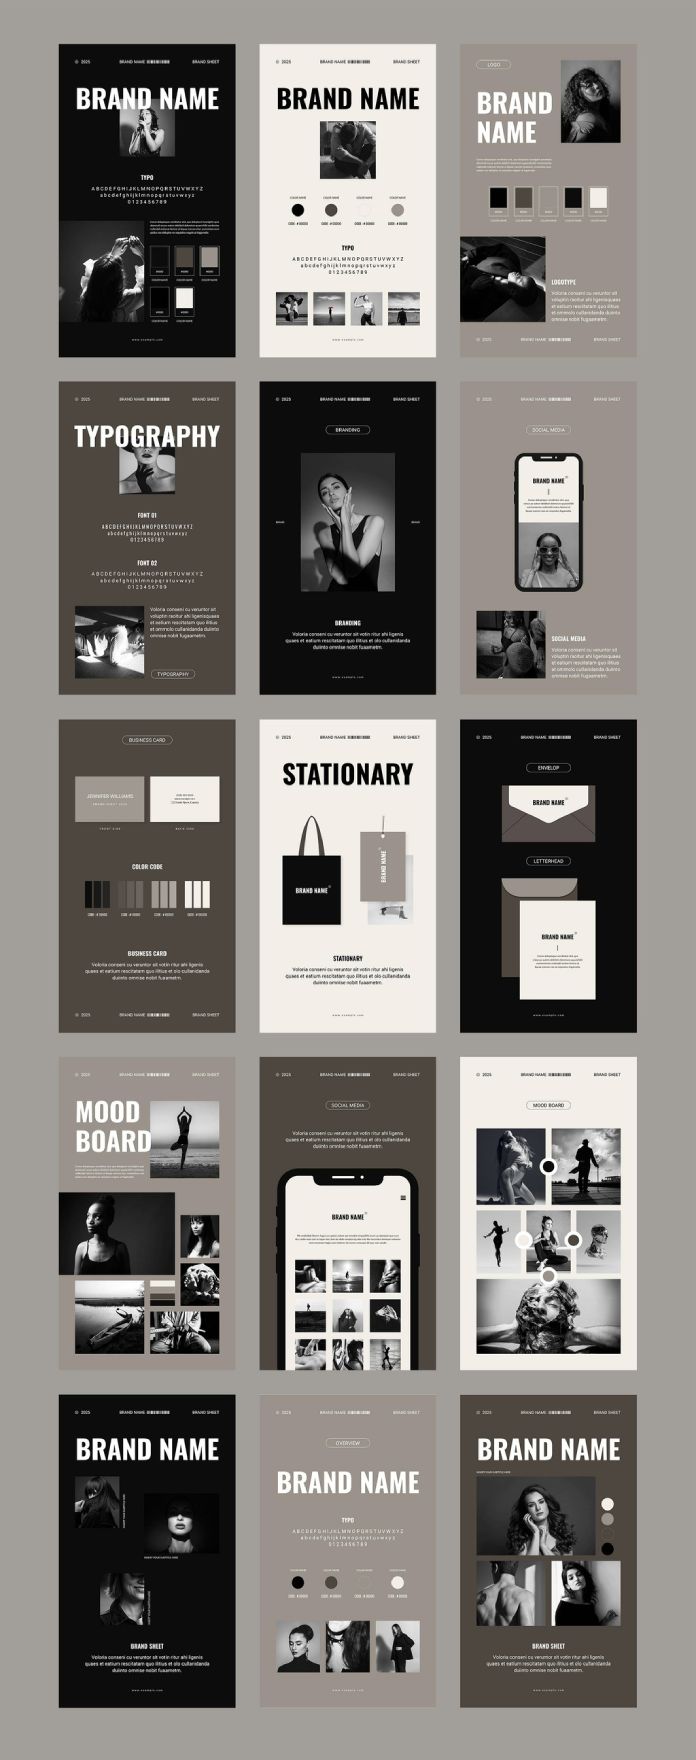 Brand Sheets Presentation Template in 1080x1920 px for Social Media Stories and Reels.